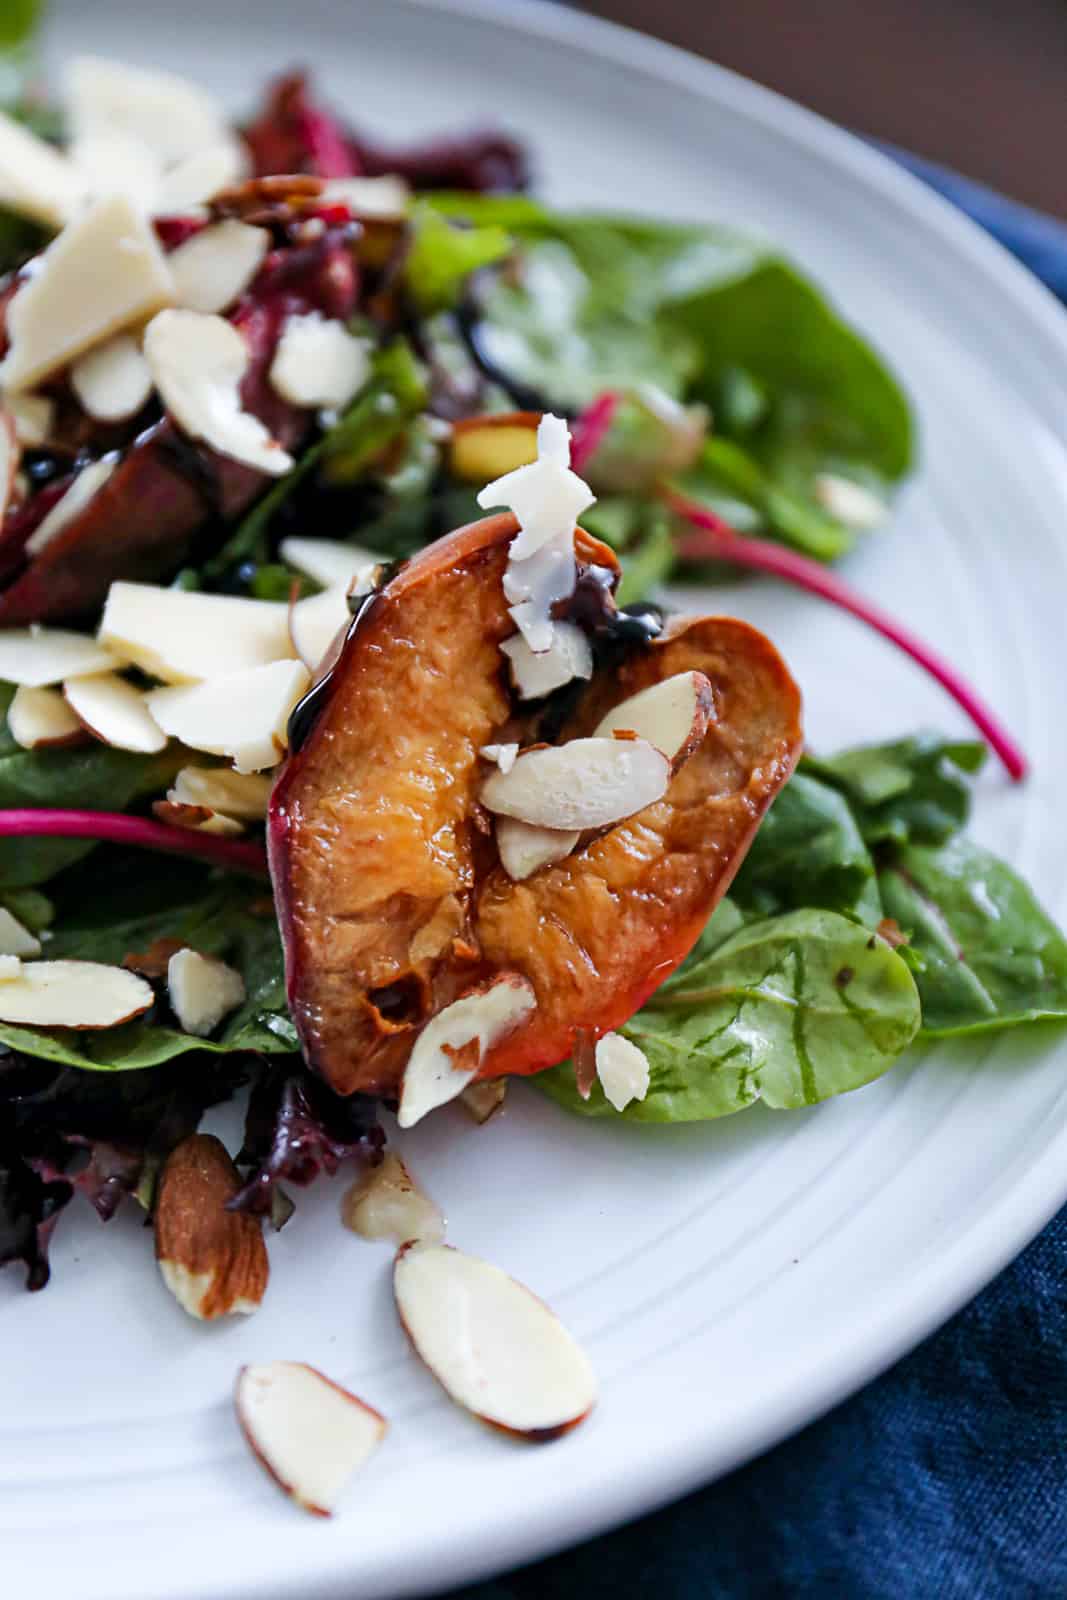 Traeger Smoked Peach Appetizer Salad with almonds and balsamic glaze